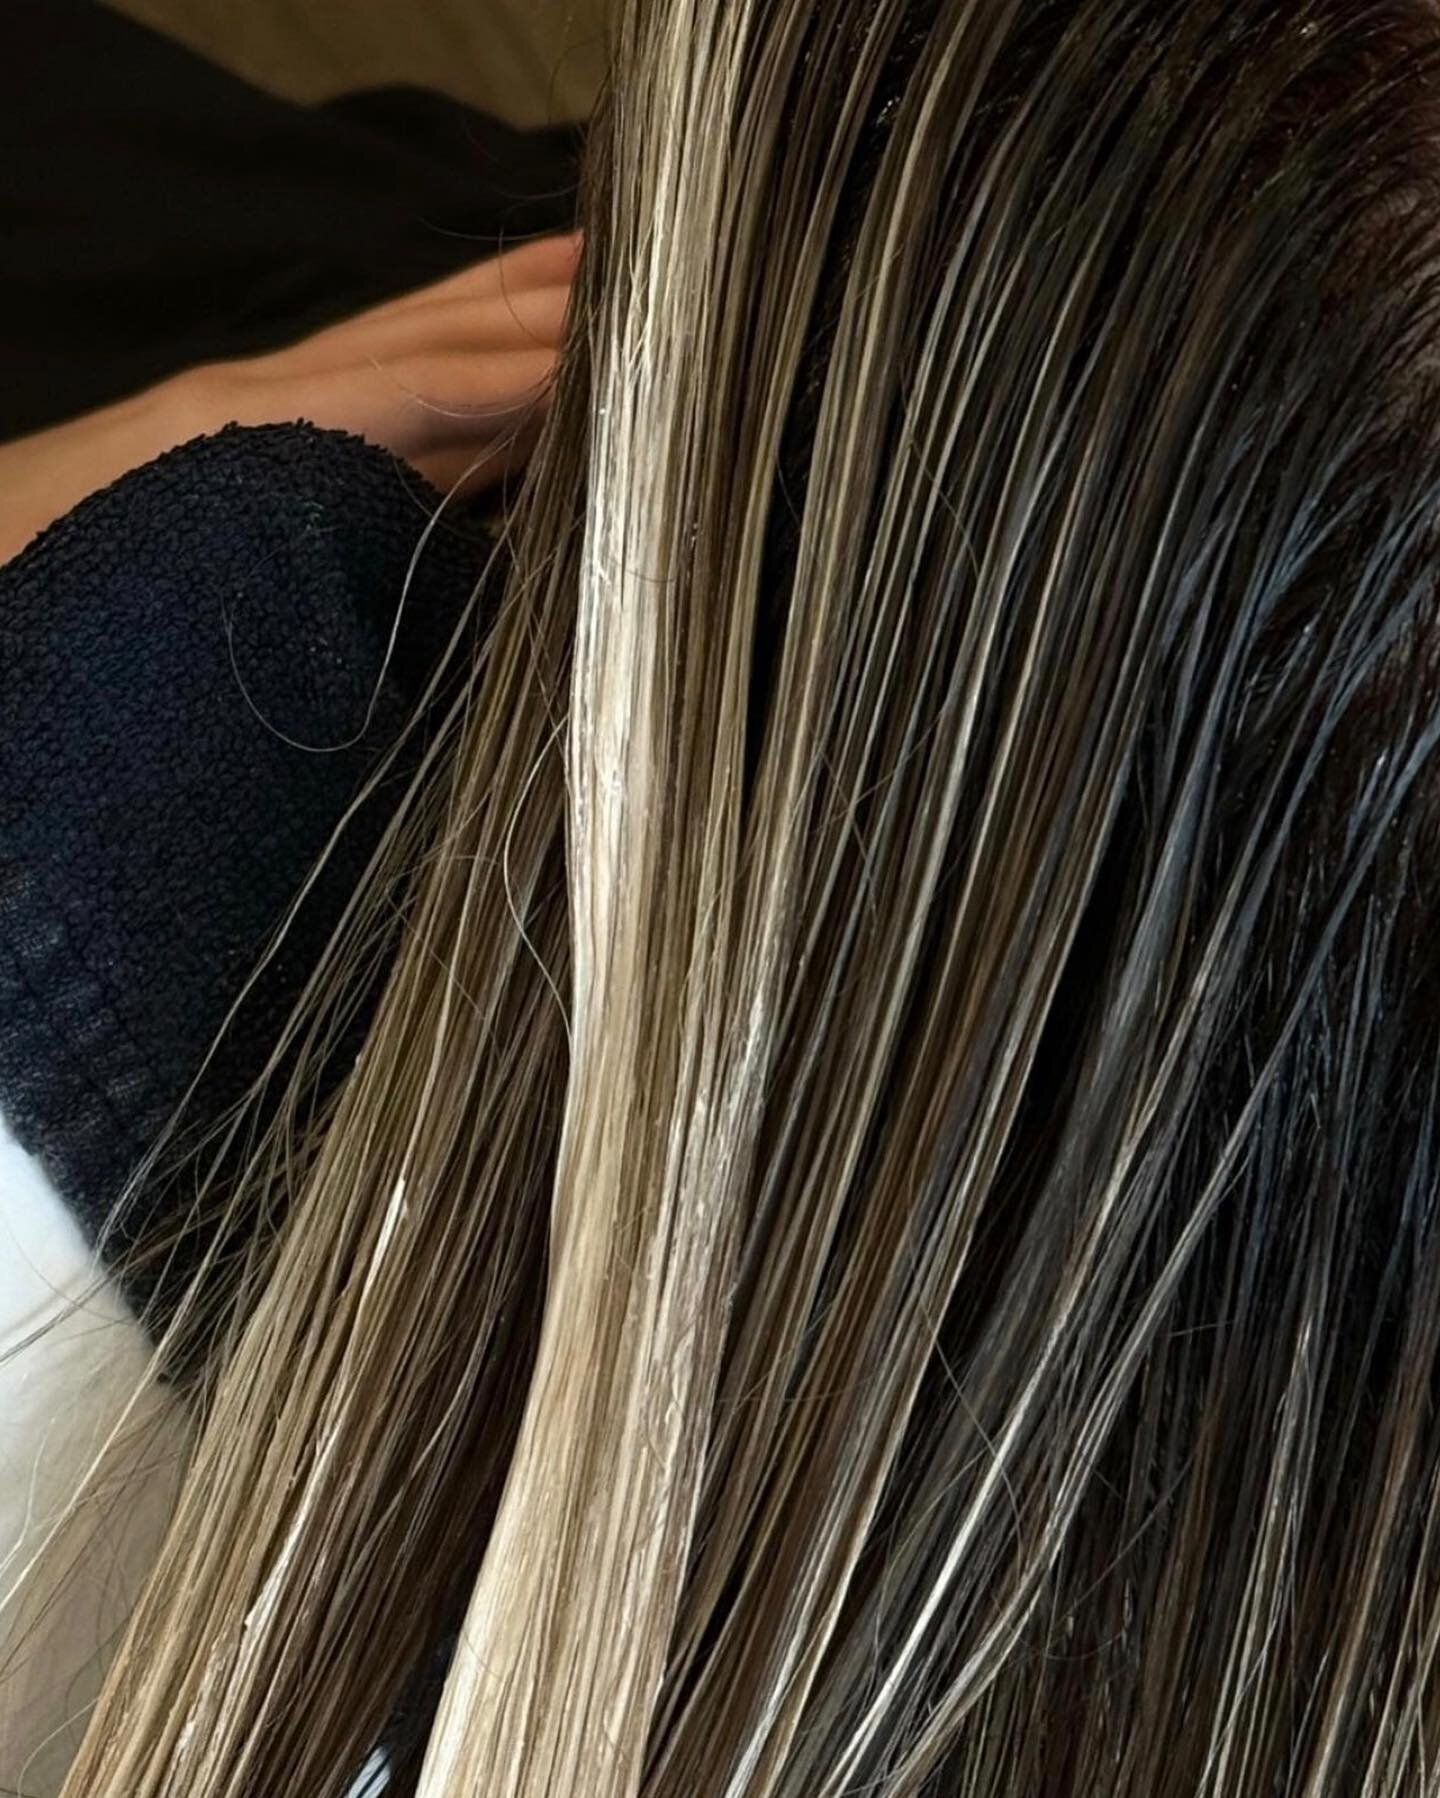 Ever wonder why your blonde might start to feel lacklustre? Our stylist, Kyli shares her knowledge &amp; tips!

▪️Overusing Purple Shampoo 
Using this product more frequently than recommended by your stylist often results in an overdeposit of pigment